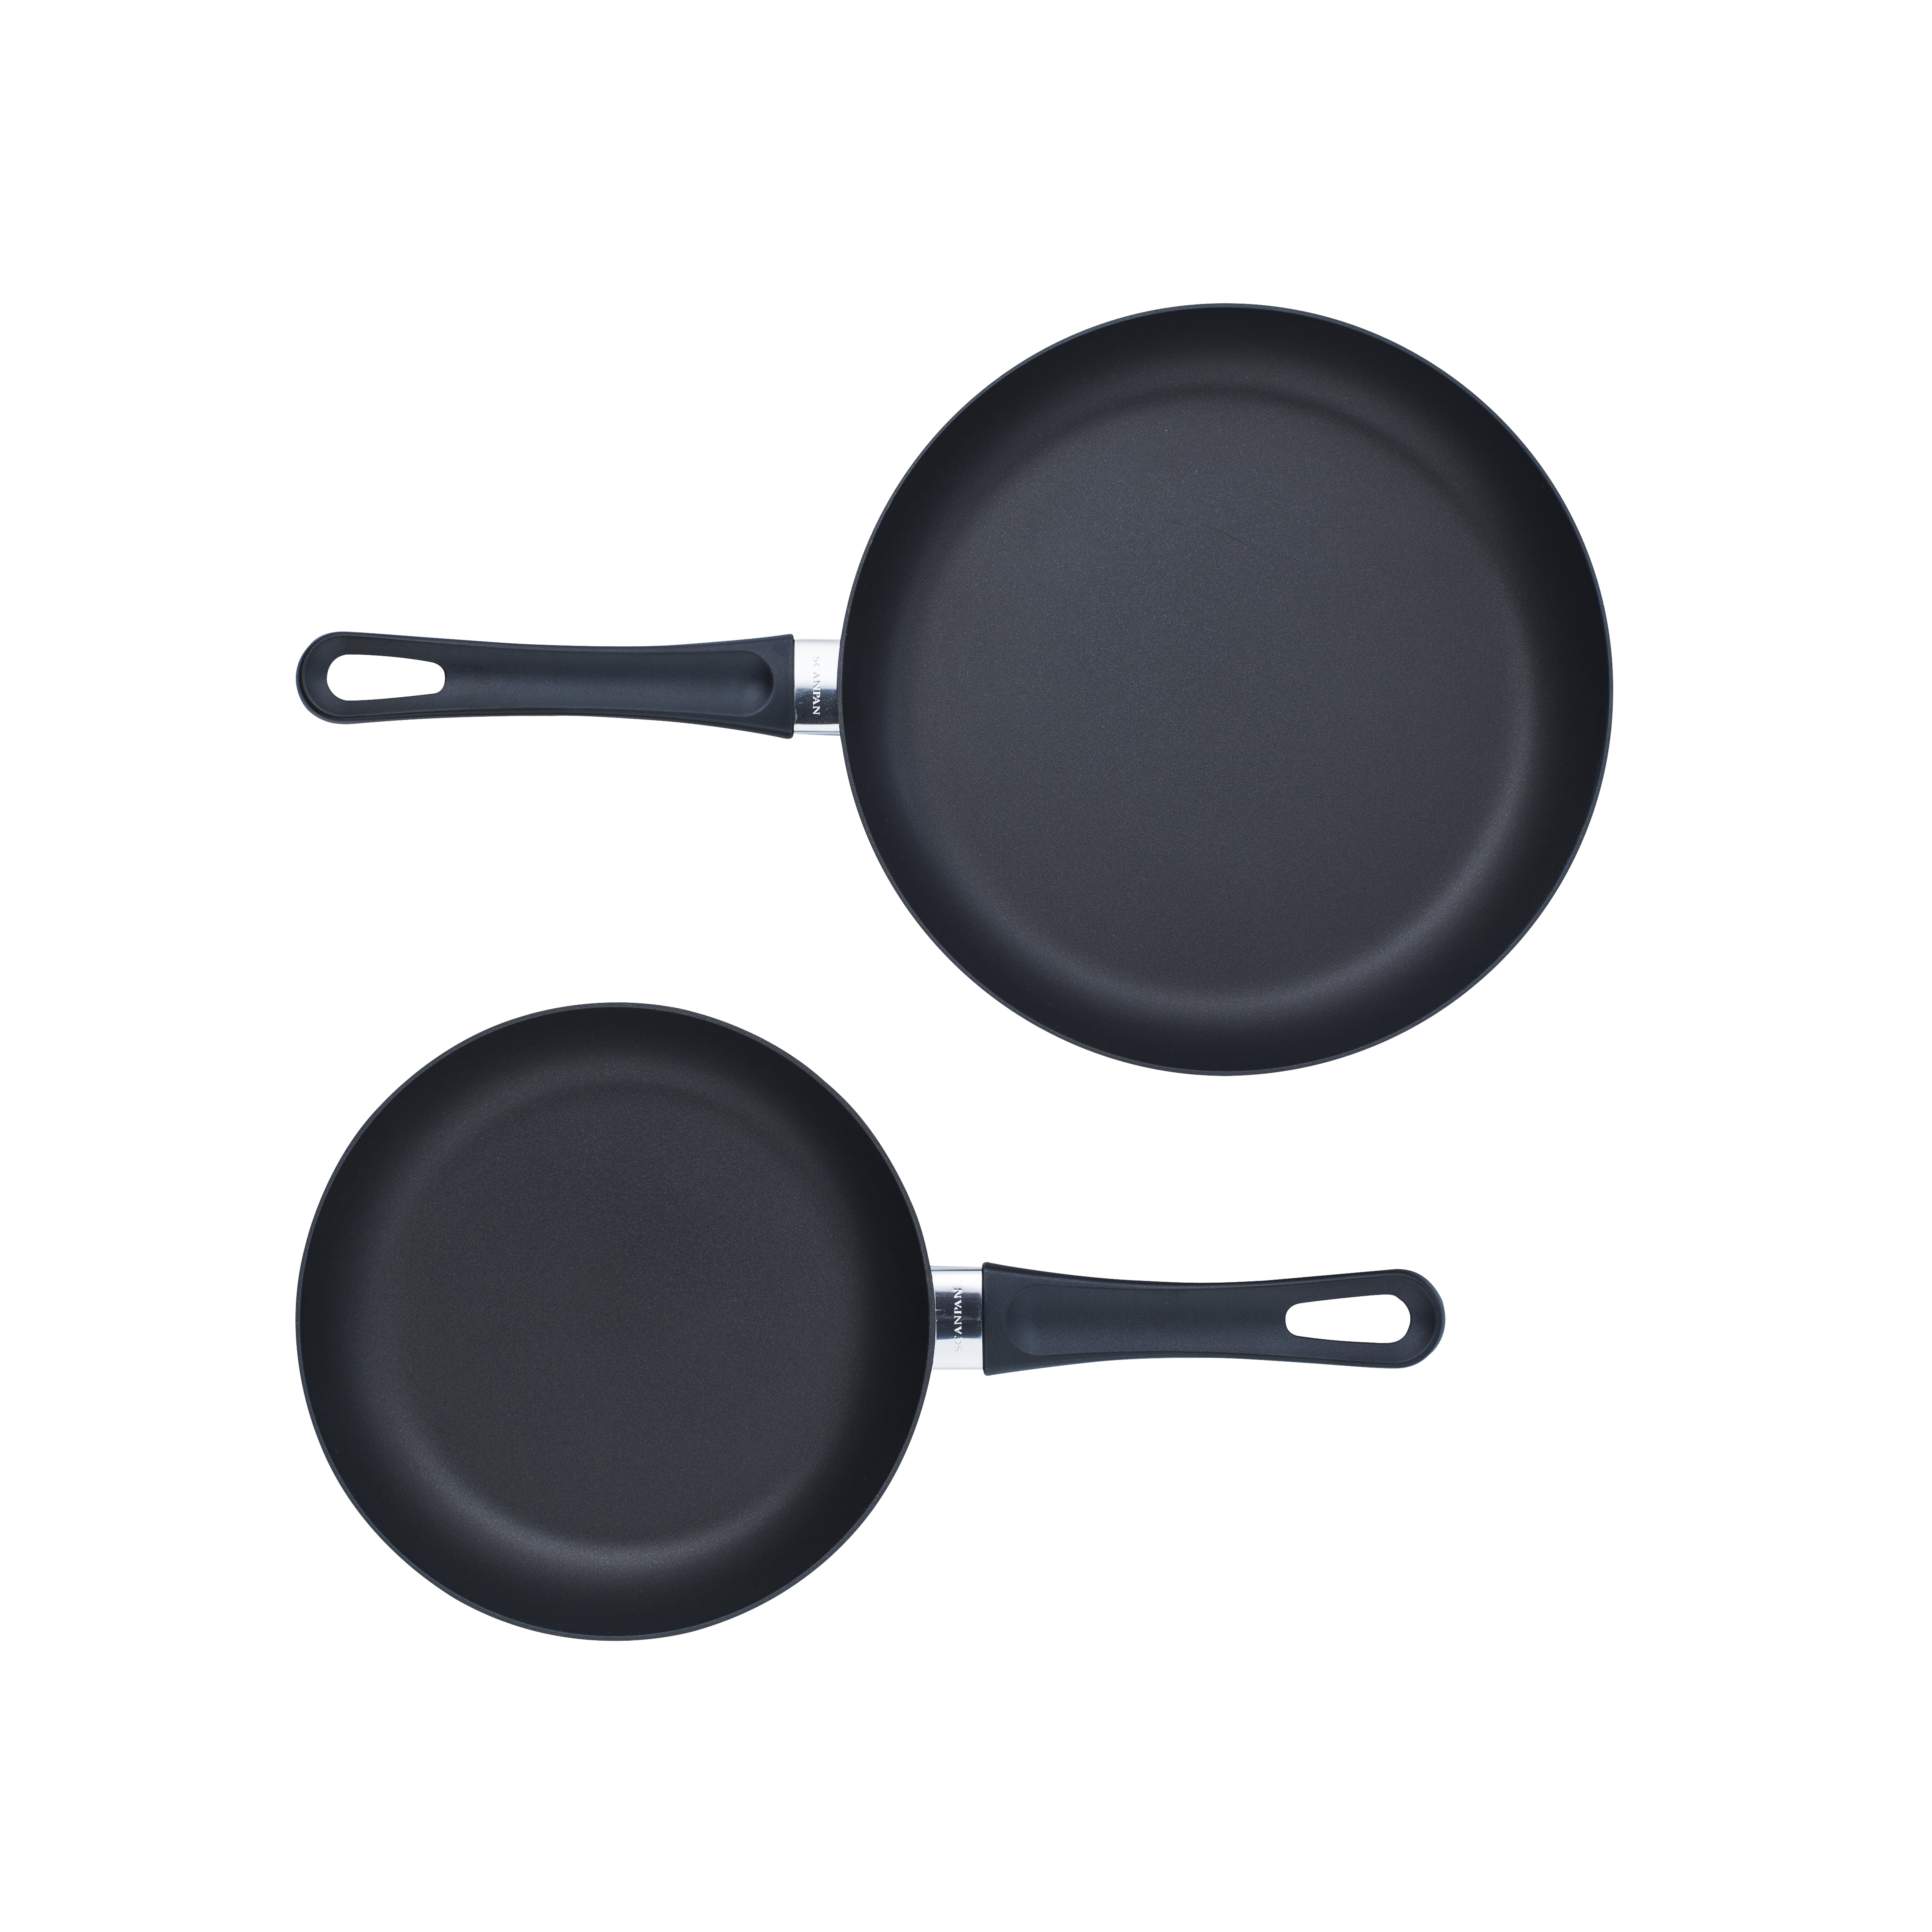 10.25 & 12.5-inch Scanpan Classic Nonstick Fry Pan Skillet Set with Lids 